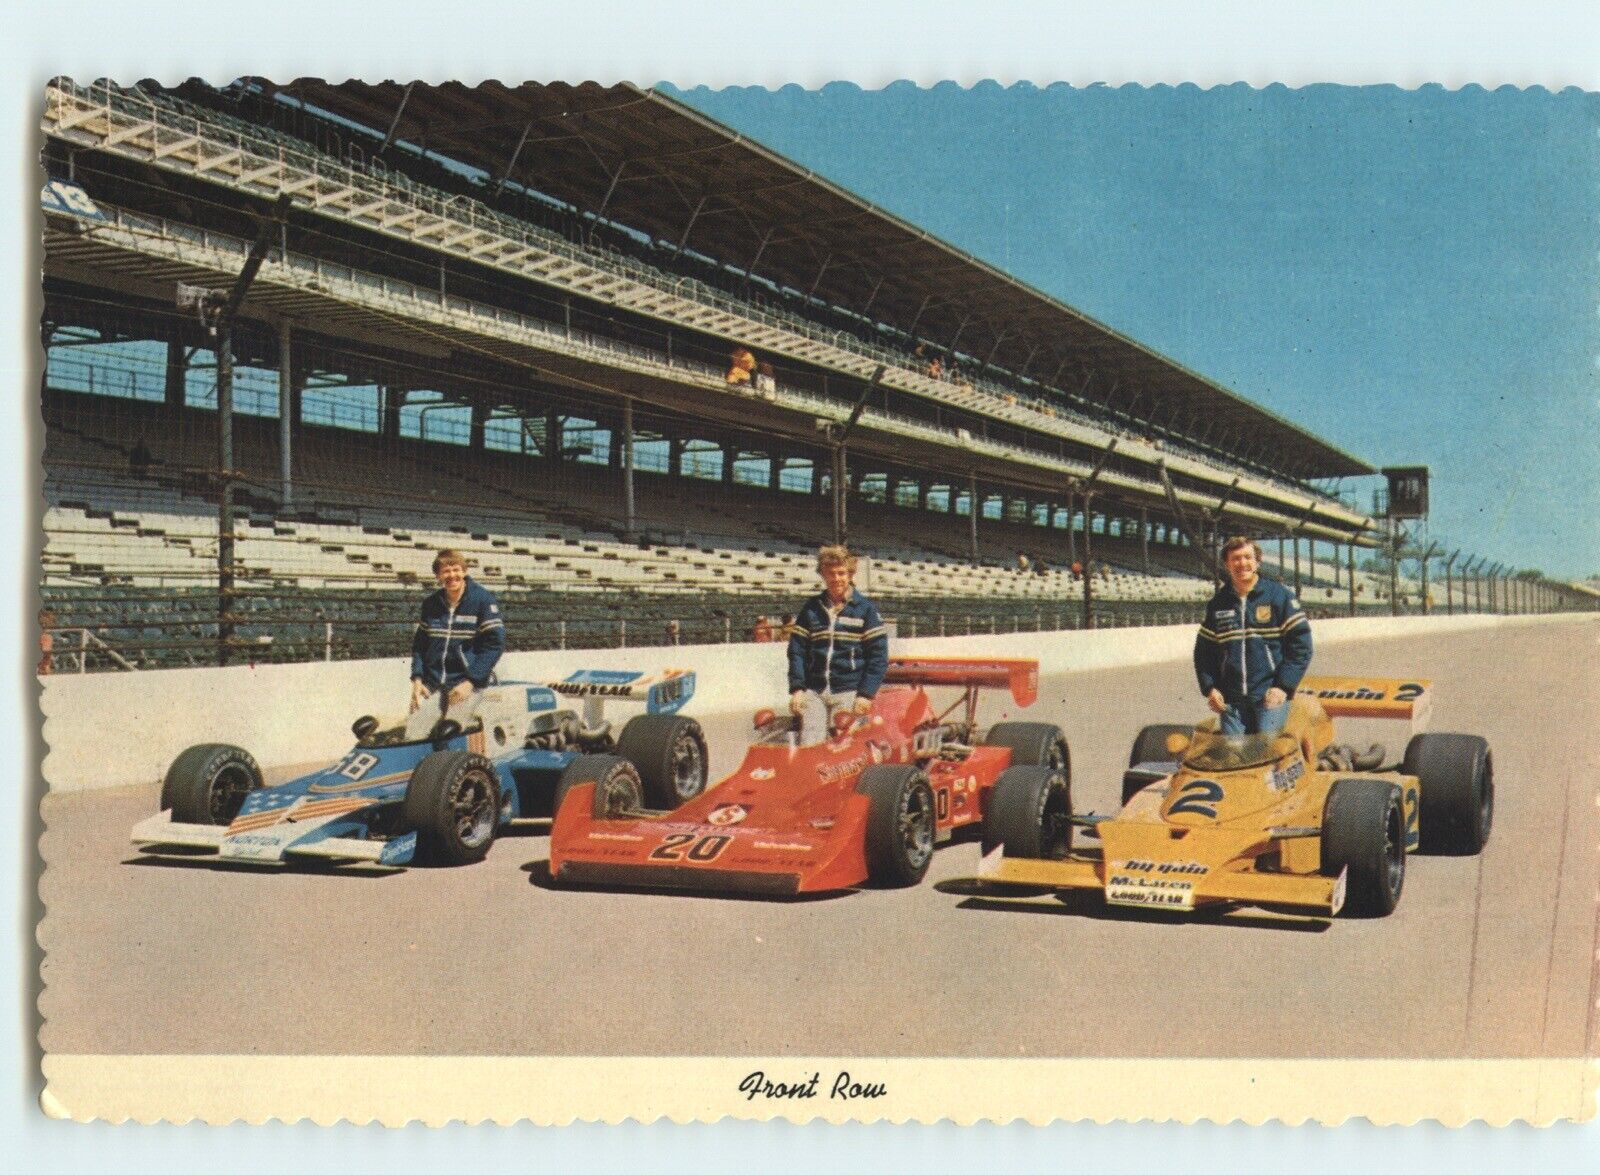 Postcard: 1976 Indianapolis 500 - Front Row Drivers: Sneva, Johncock, Rutherford